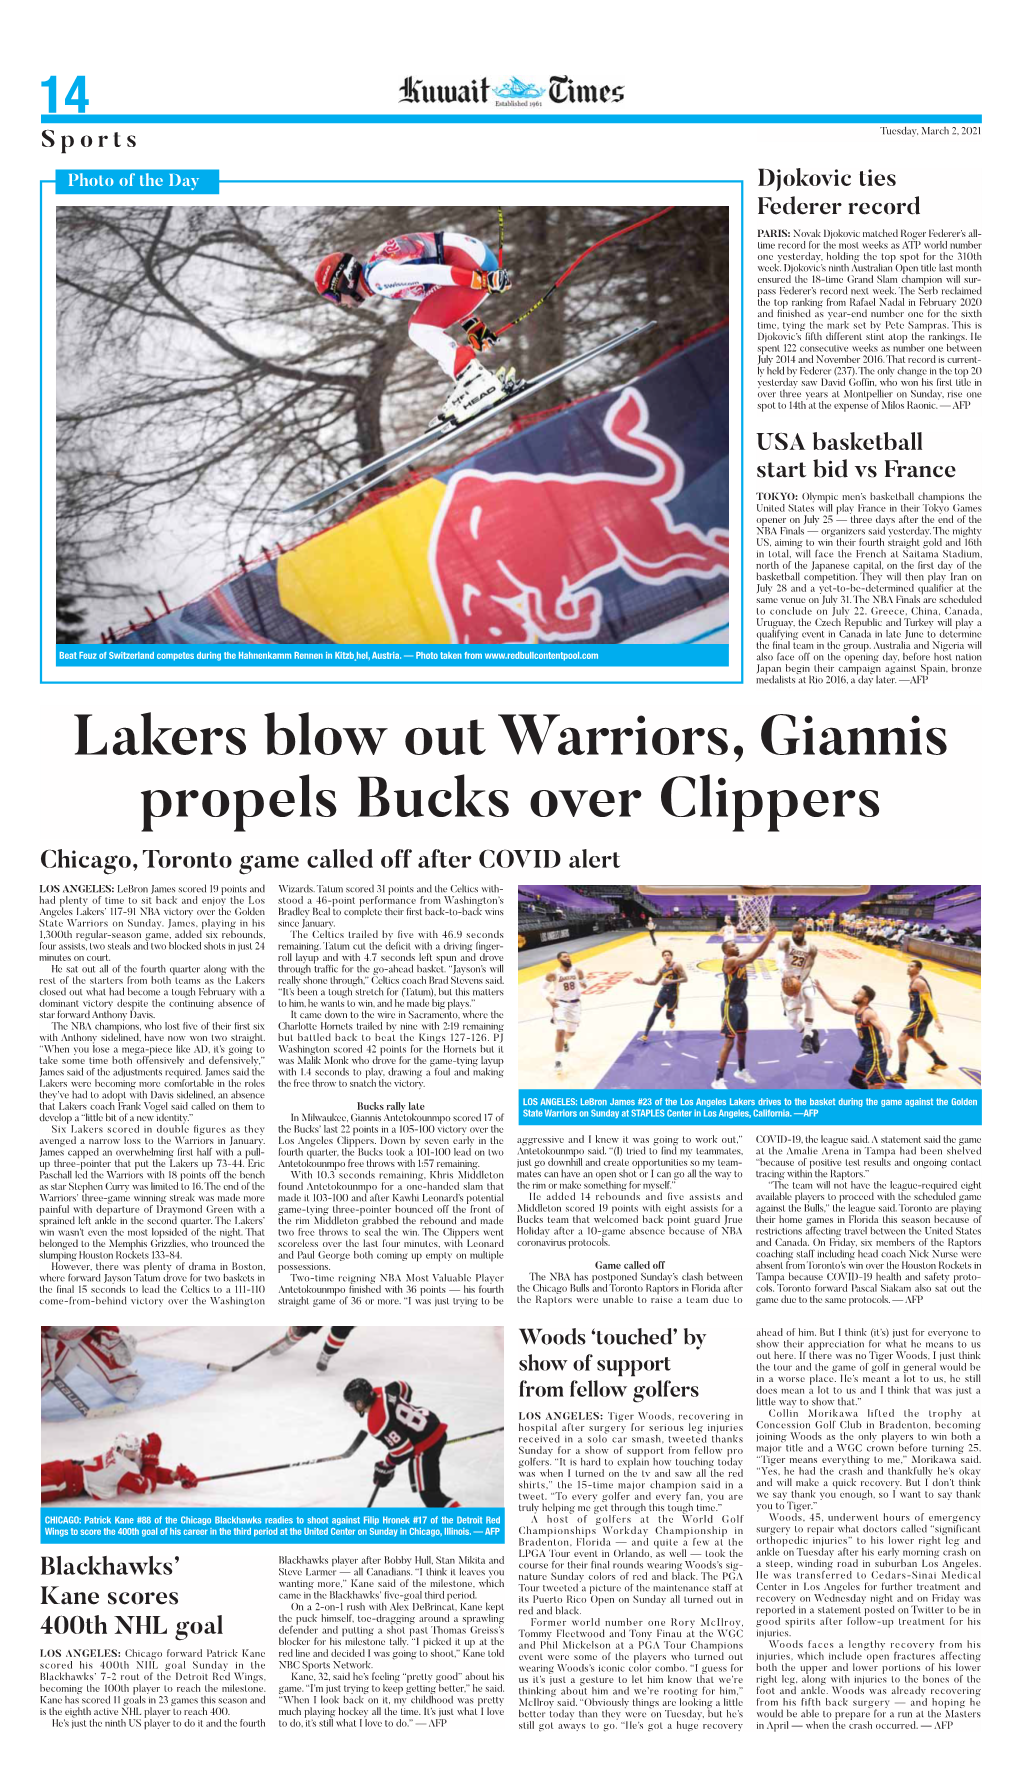 Lakers Blow out Warriors, Giannis Propels Bucks Over Clippers Chicago, Toronto Game Called Off After COVID Alert